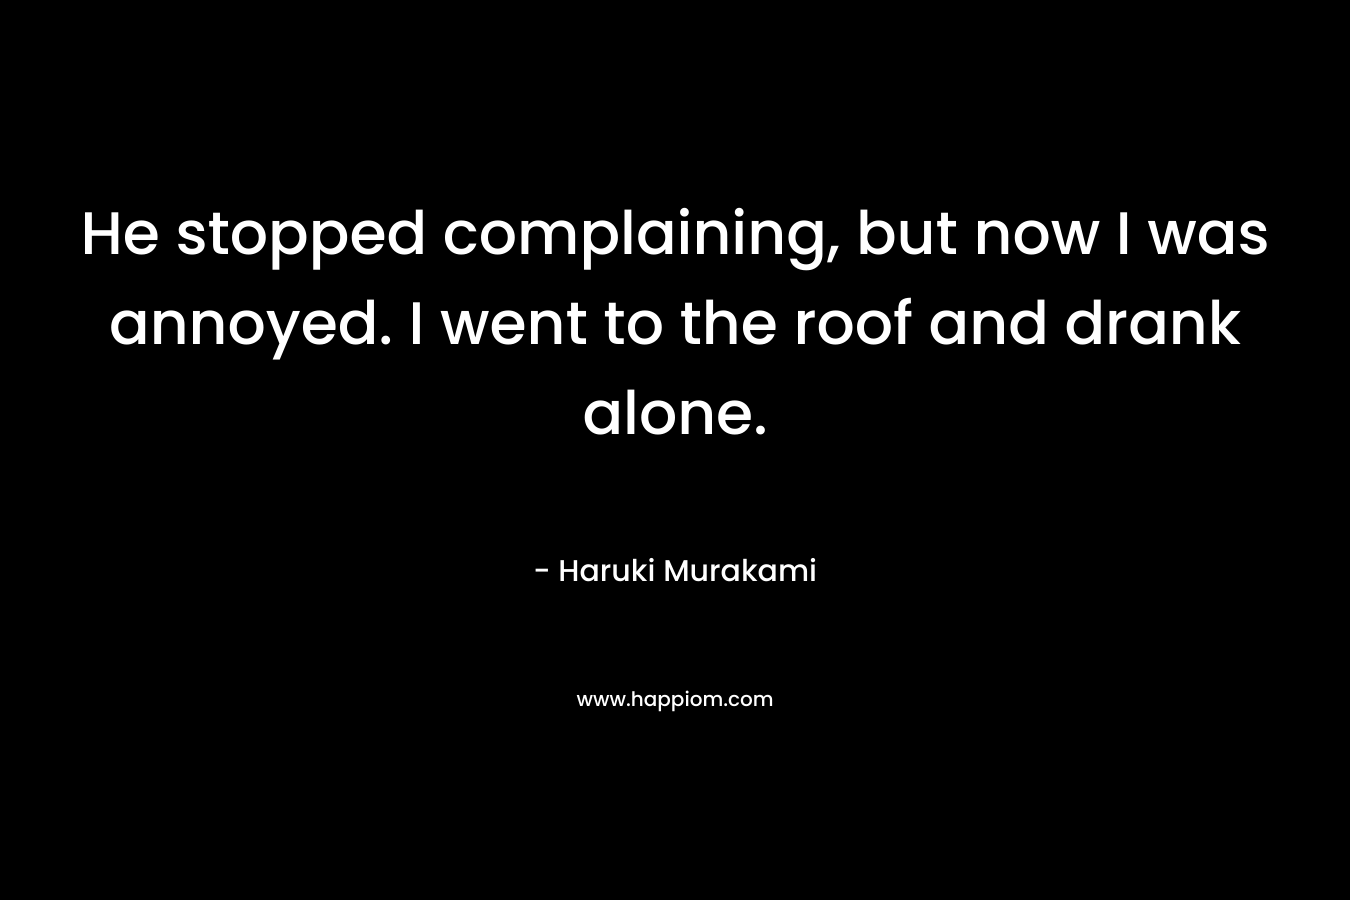 He stopped complaining, but now I was annoyed. I went to the roof and drank alone.